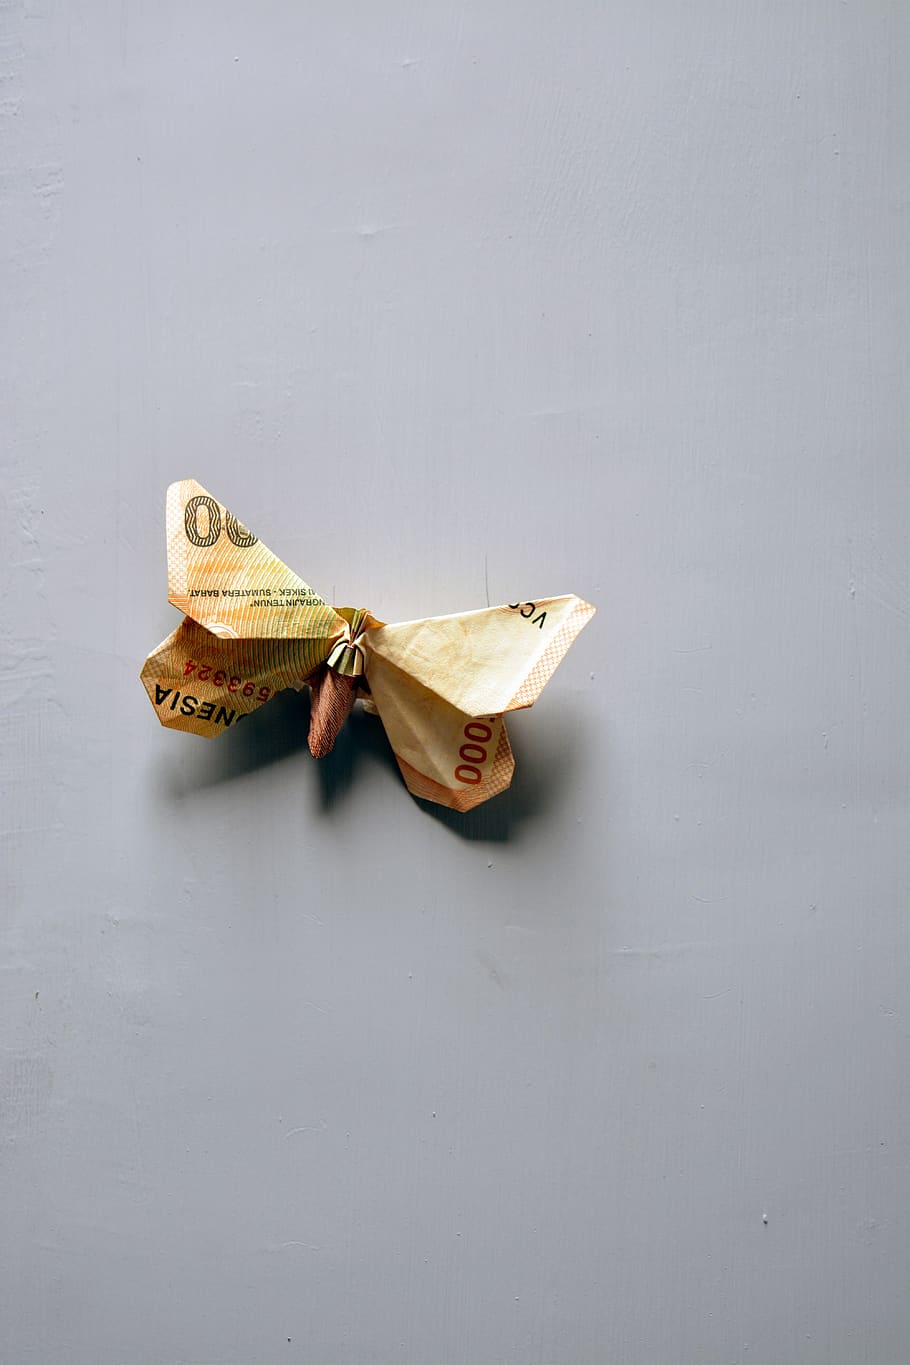 origami, butterfly, money, paper, japan, insect, dollar, japanese, economy, wealth